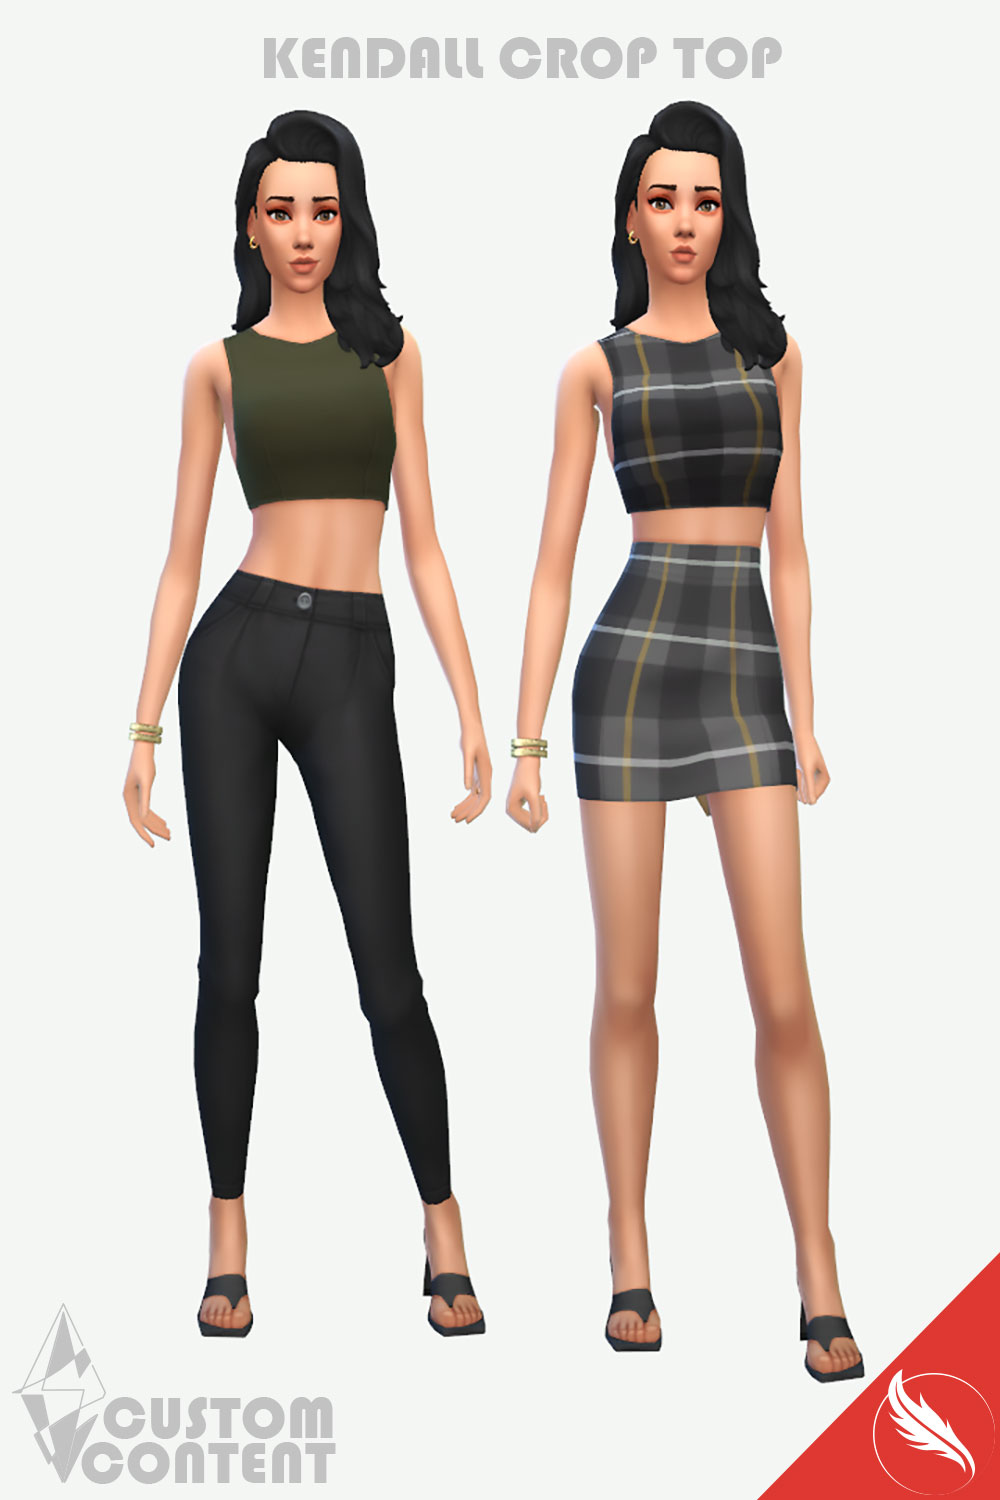 The Sims 4 Crop Top Custom Content